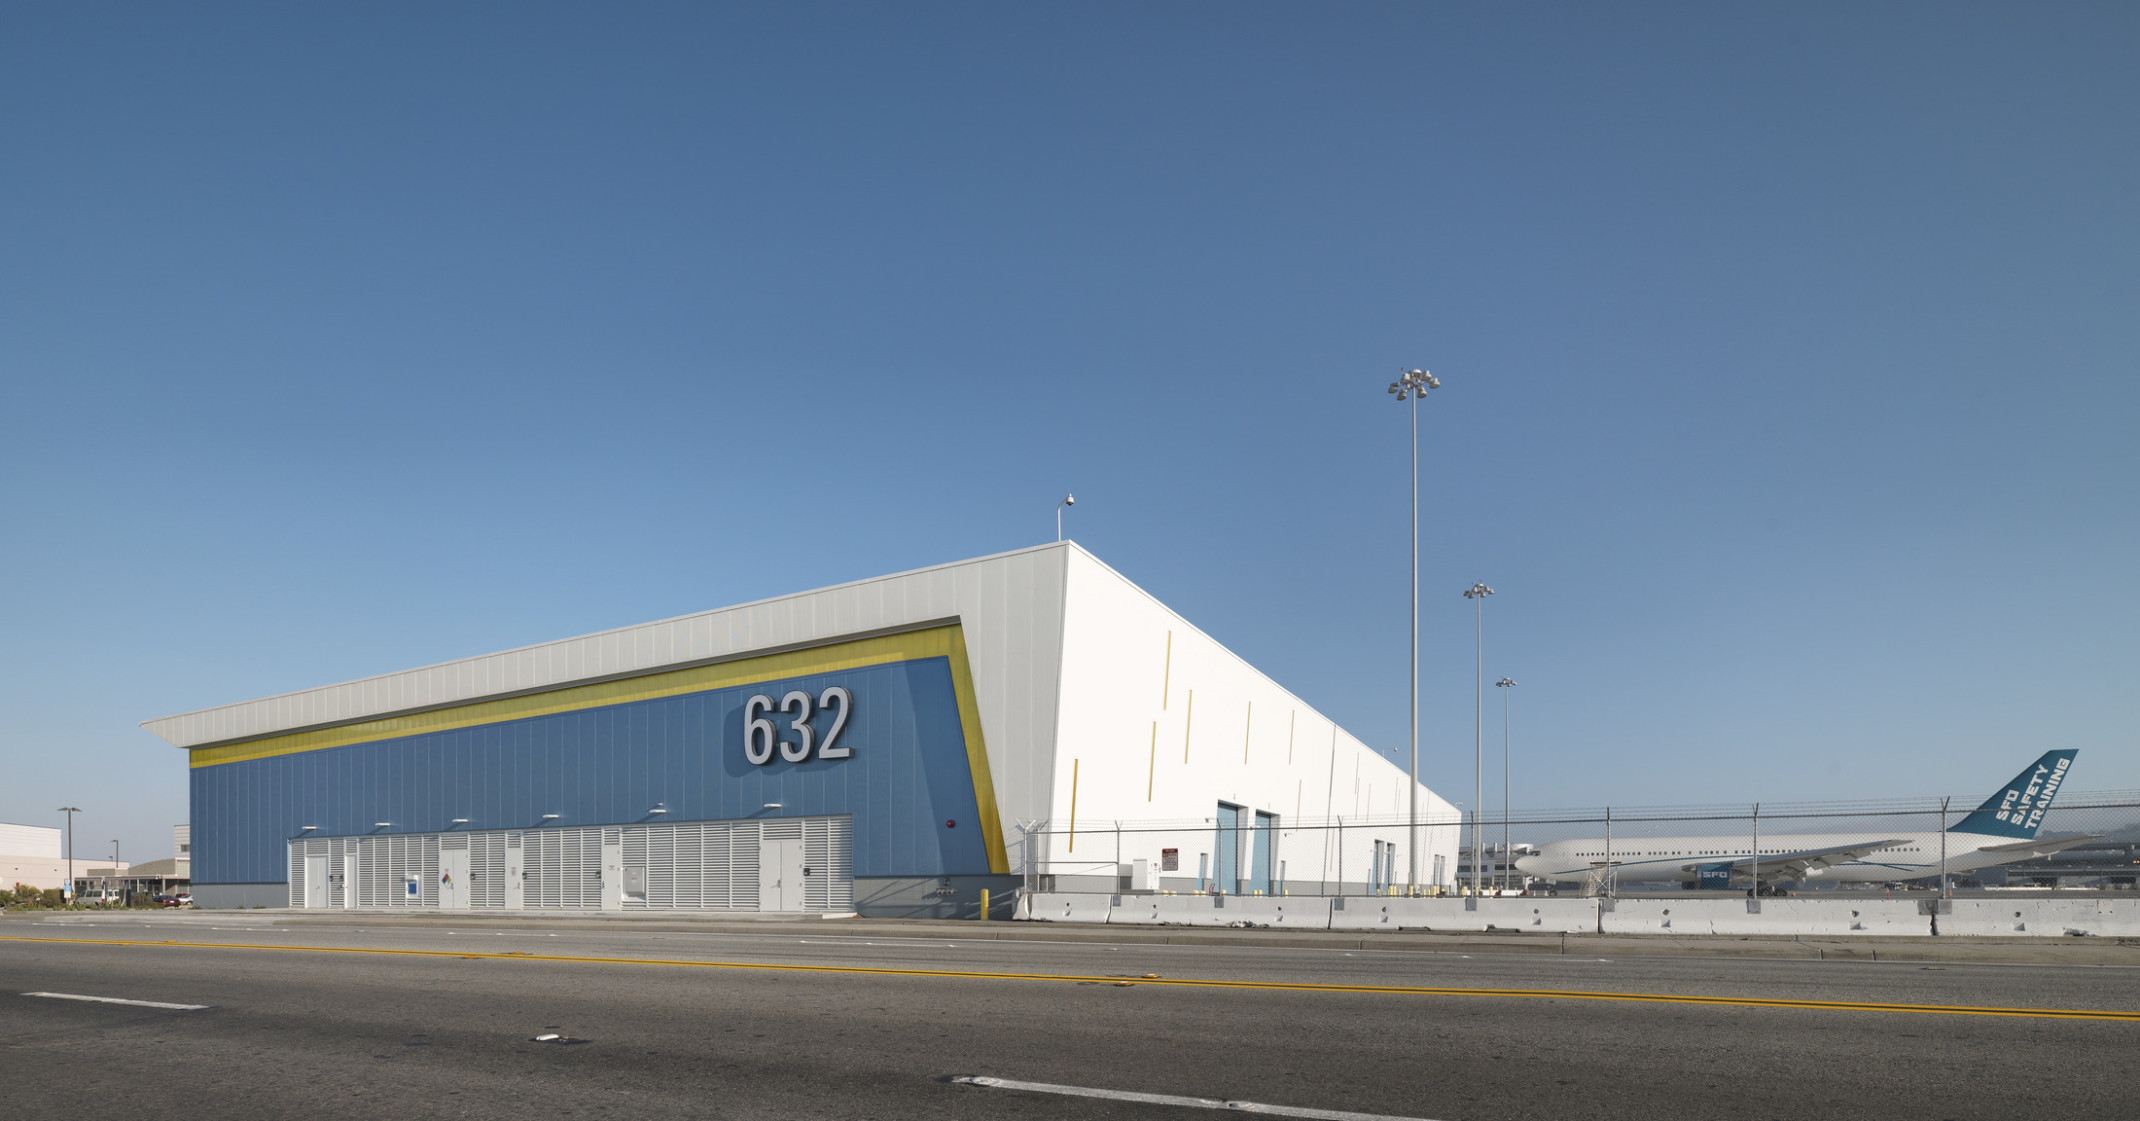 San Francisco International Airport’s West Field Cargo Facility, a blue yellow and white wrapped facade building beside plane